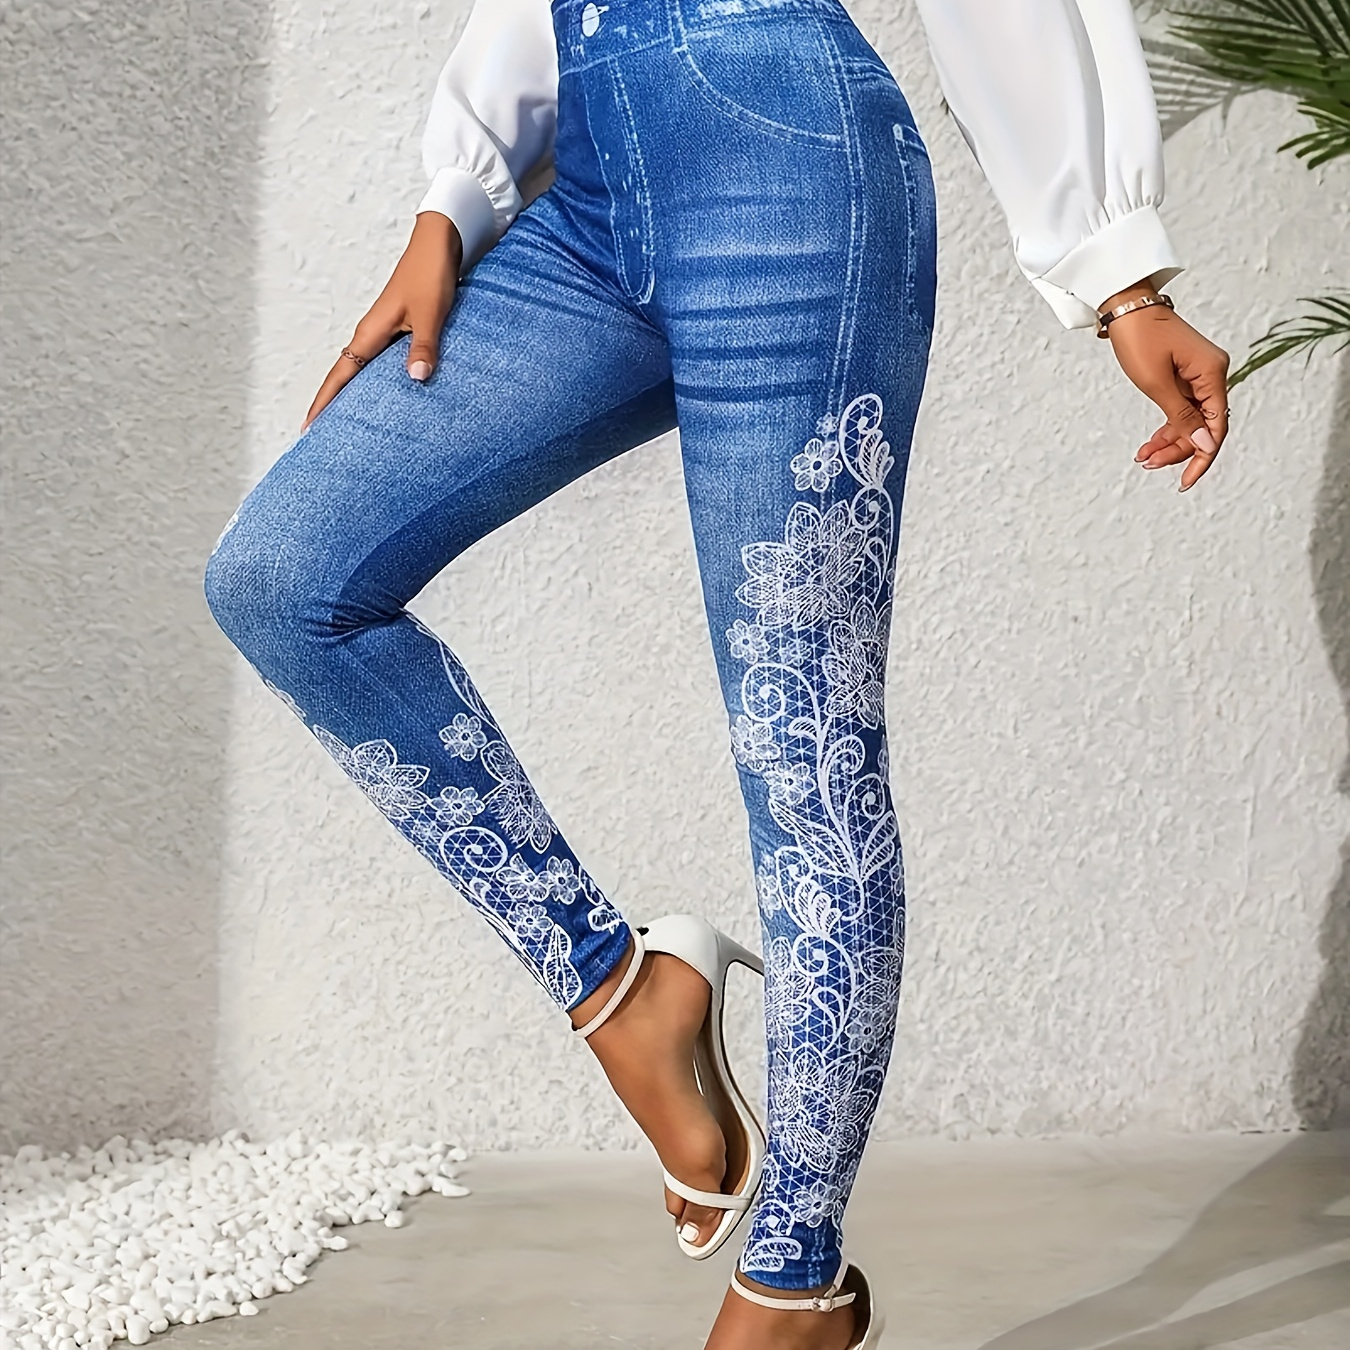 

Floral Print Faux Denim Leggings, Casual High Waist Every Day Stretchy Leggings, Women's Clothing